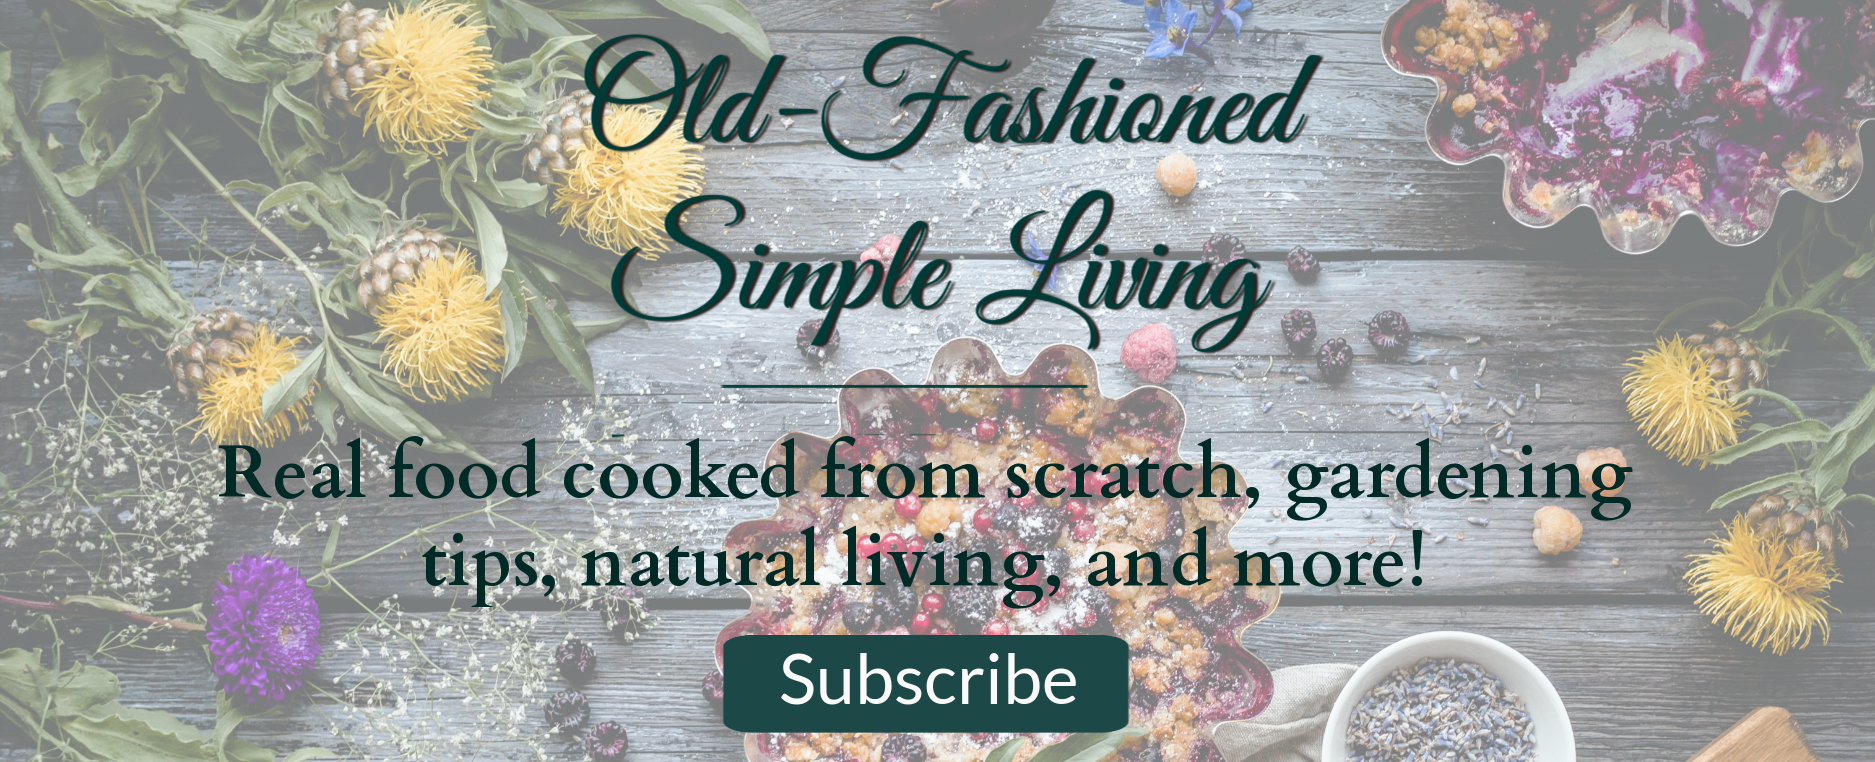 Banner to subscribe to updates for real food, gardening tips, natural living, and more.